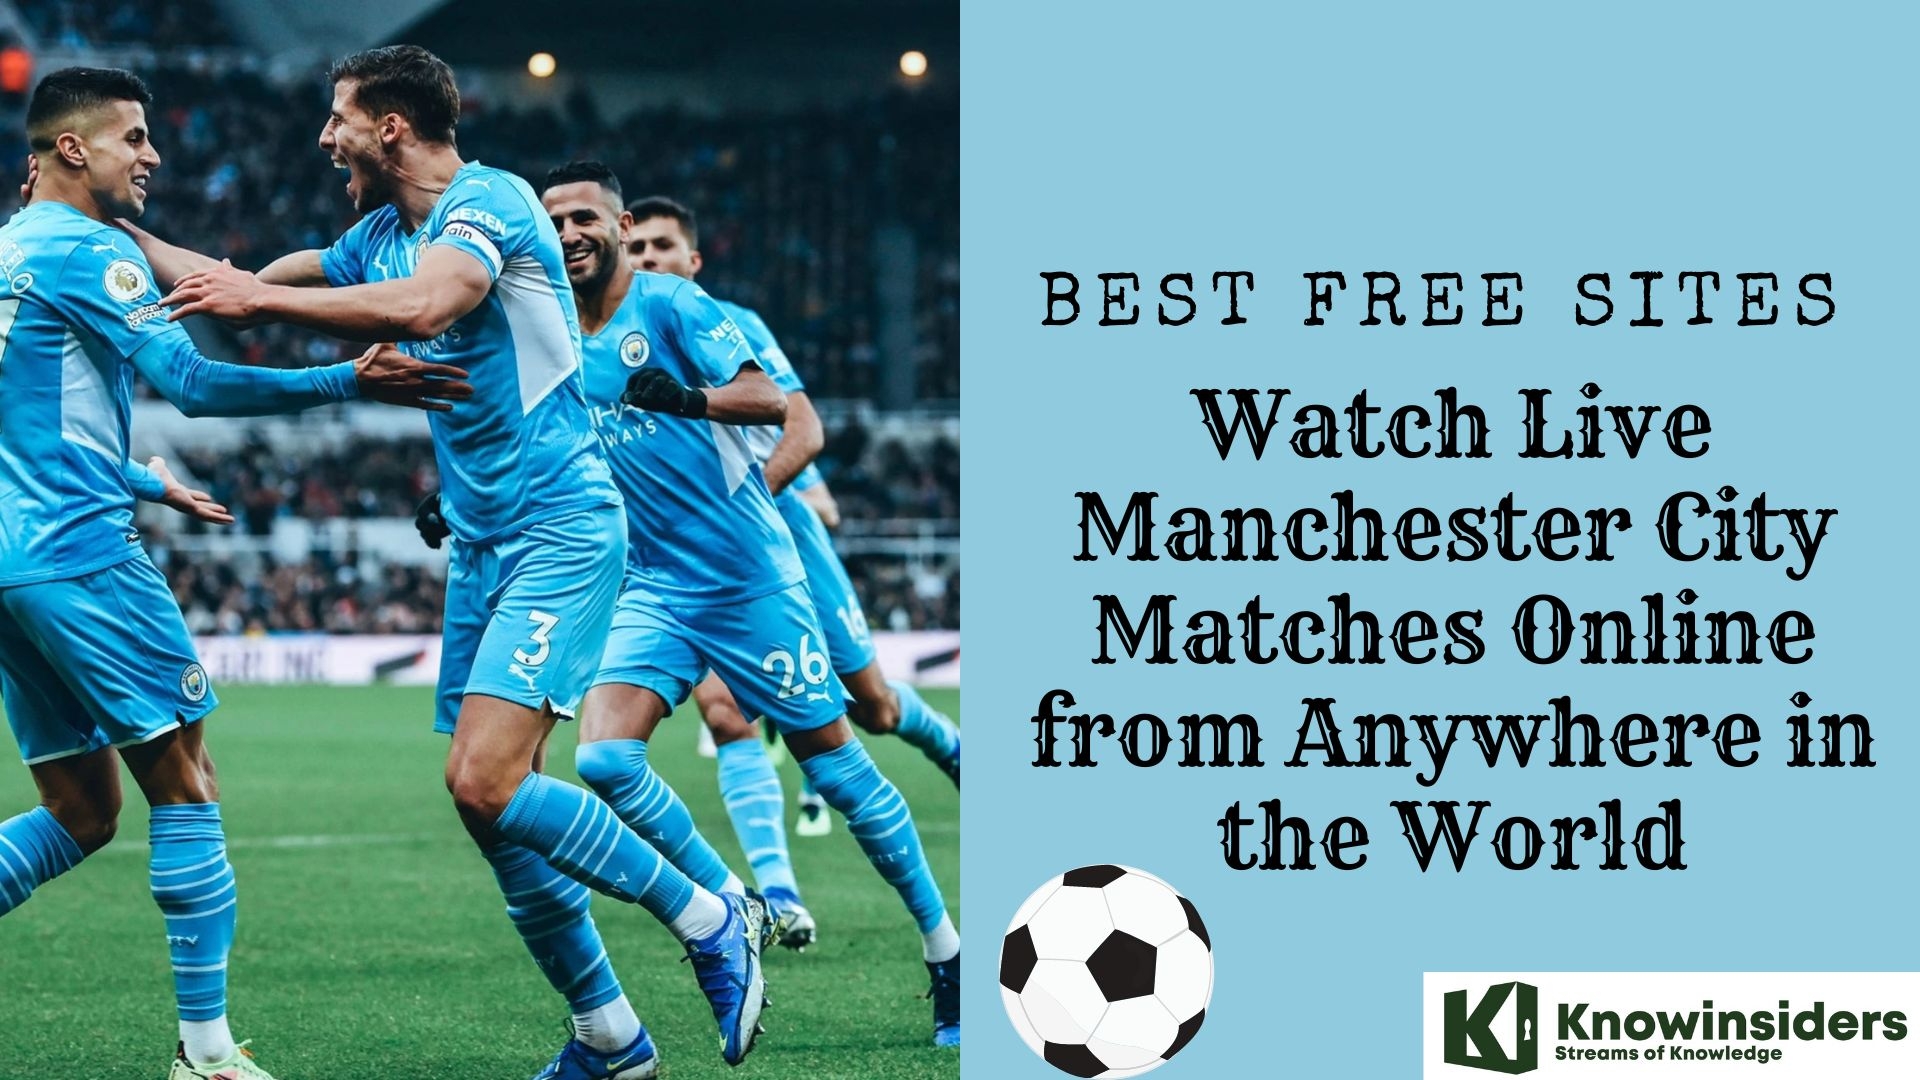 Best Free Sites to Watch Live Manchester City Matches Online from Anywhere in the World